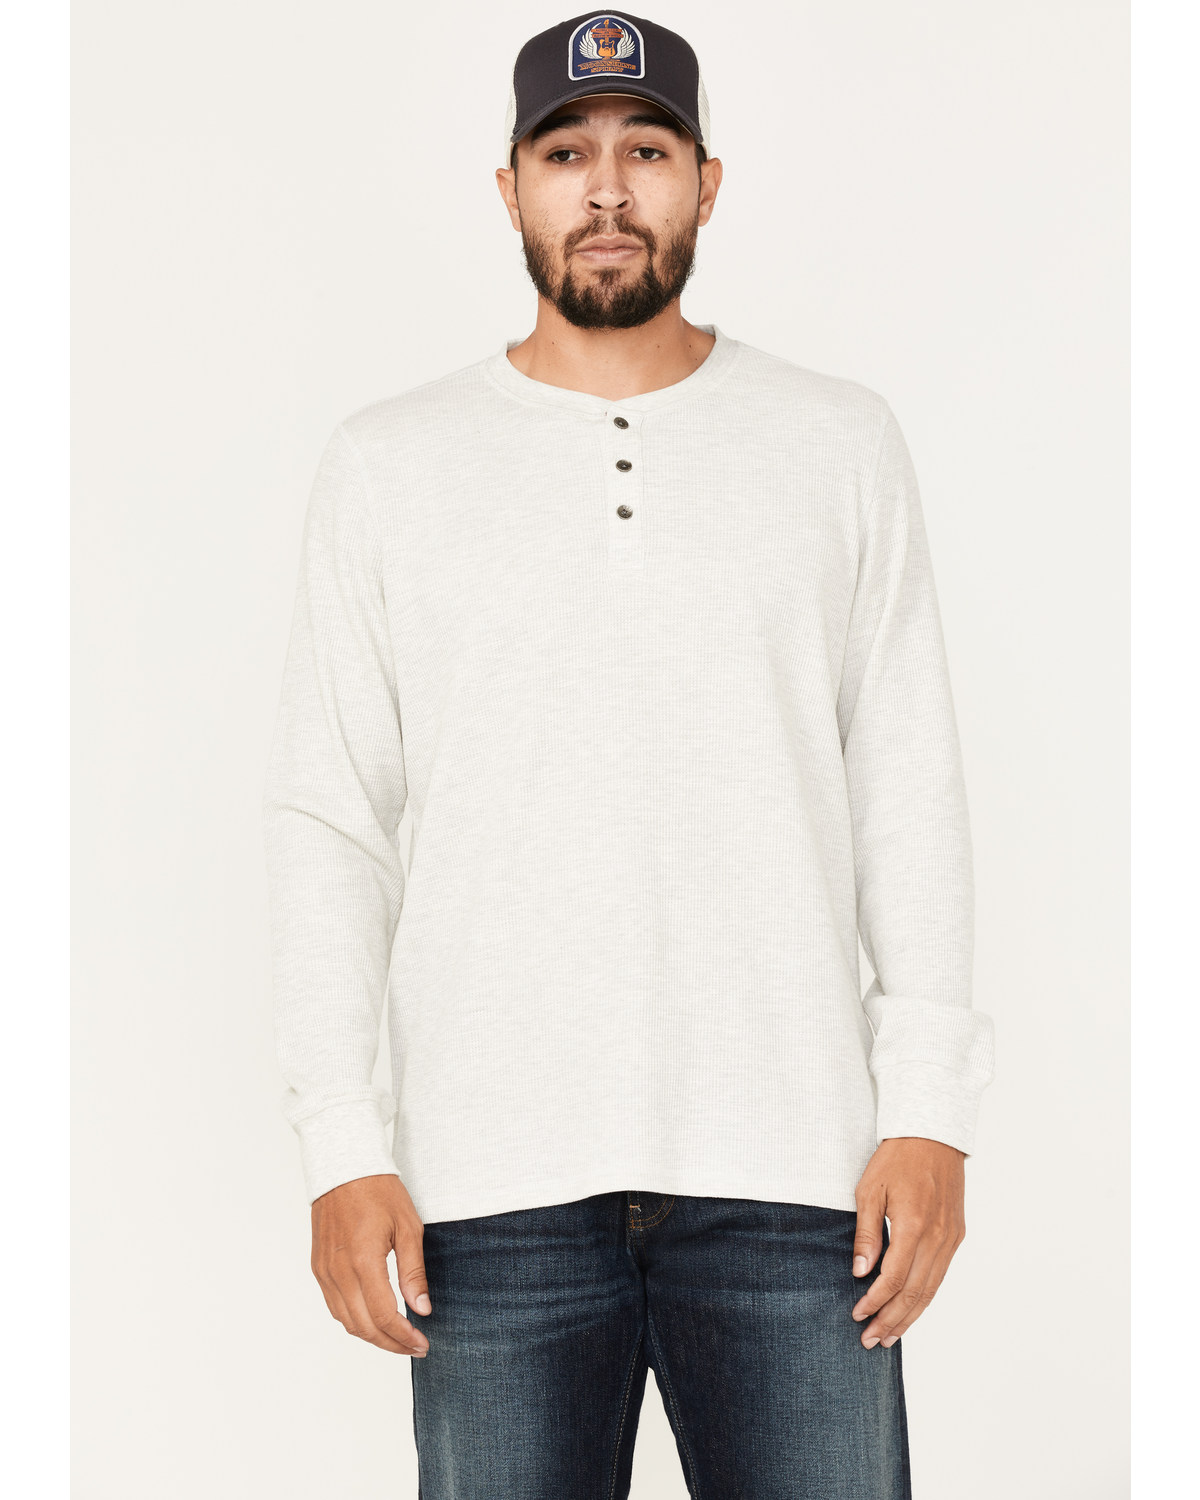 North River Men's Heathered Waffle Long Sleeve Henley